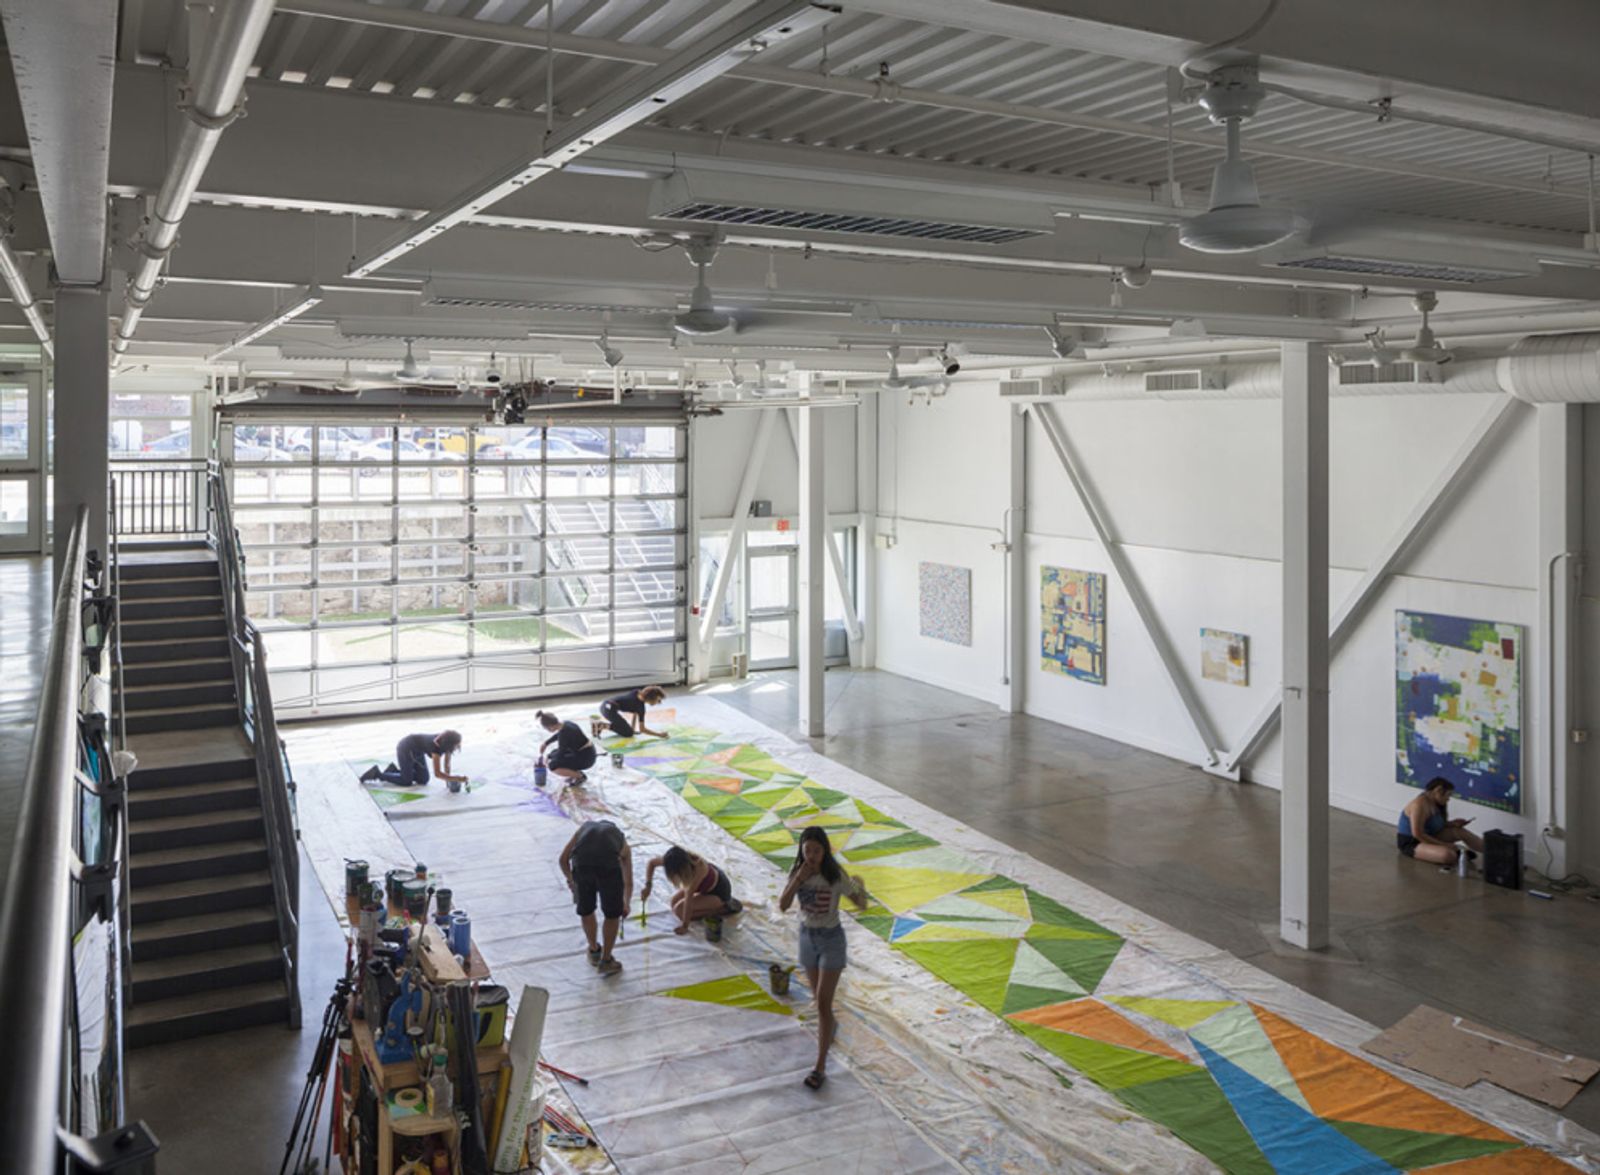 And a work space too!  Teen artists use space for large-scale client project